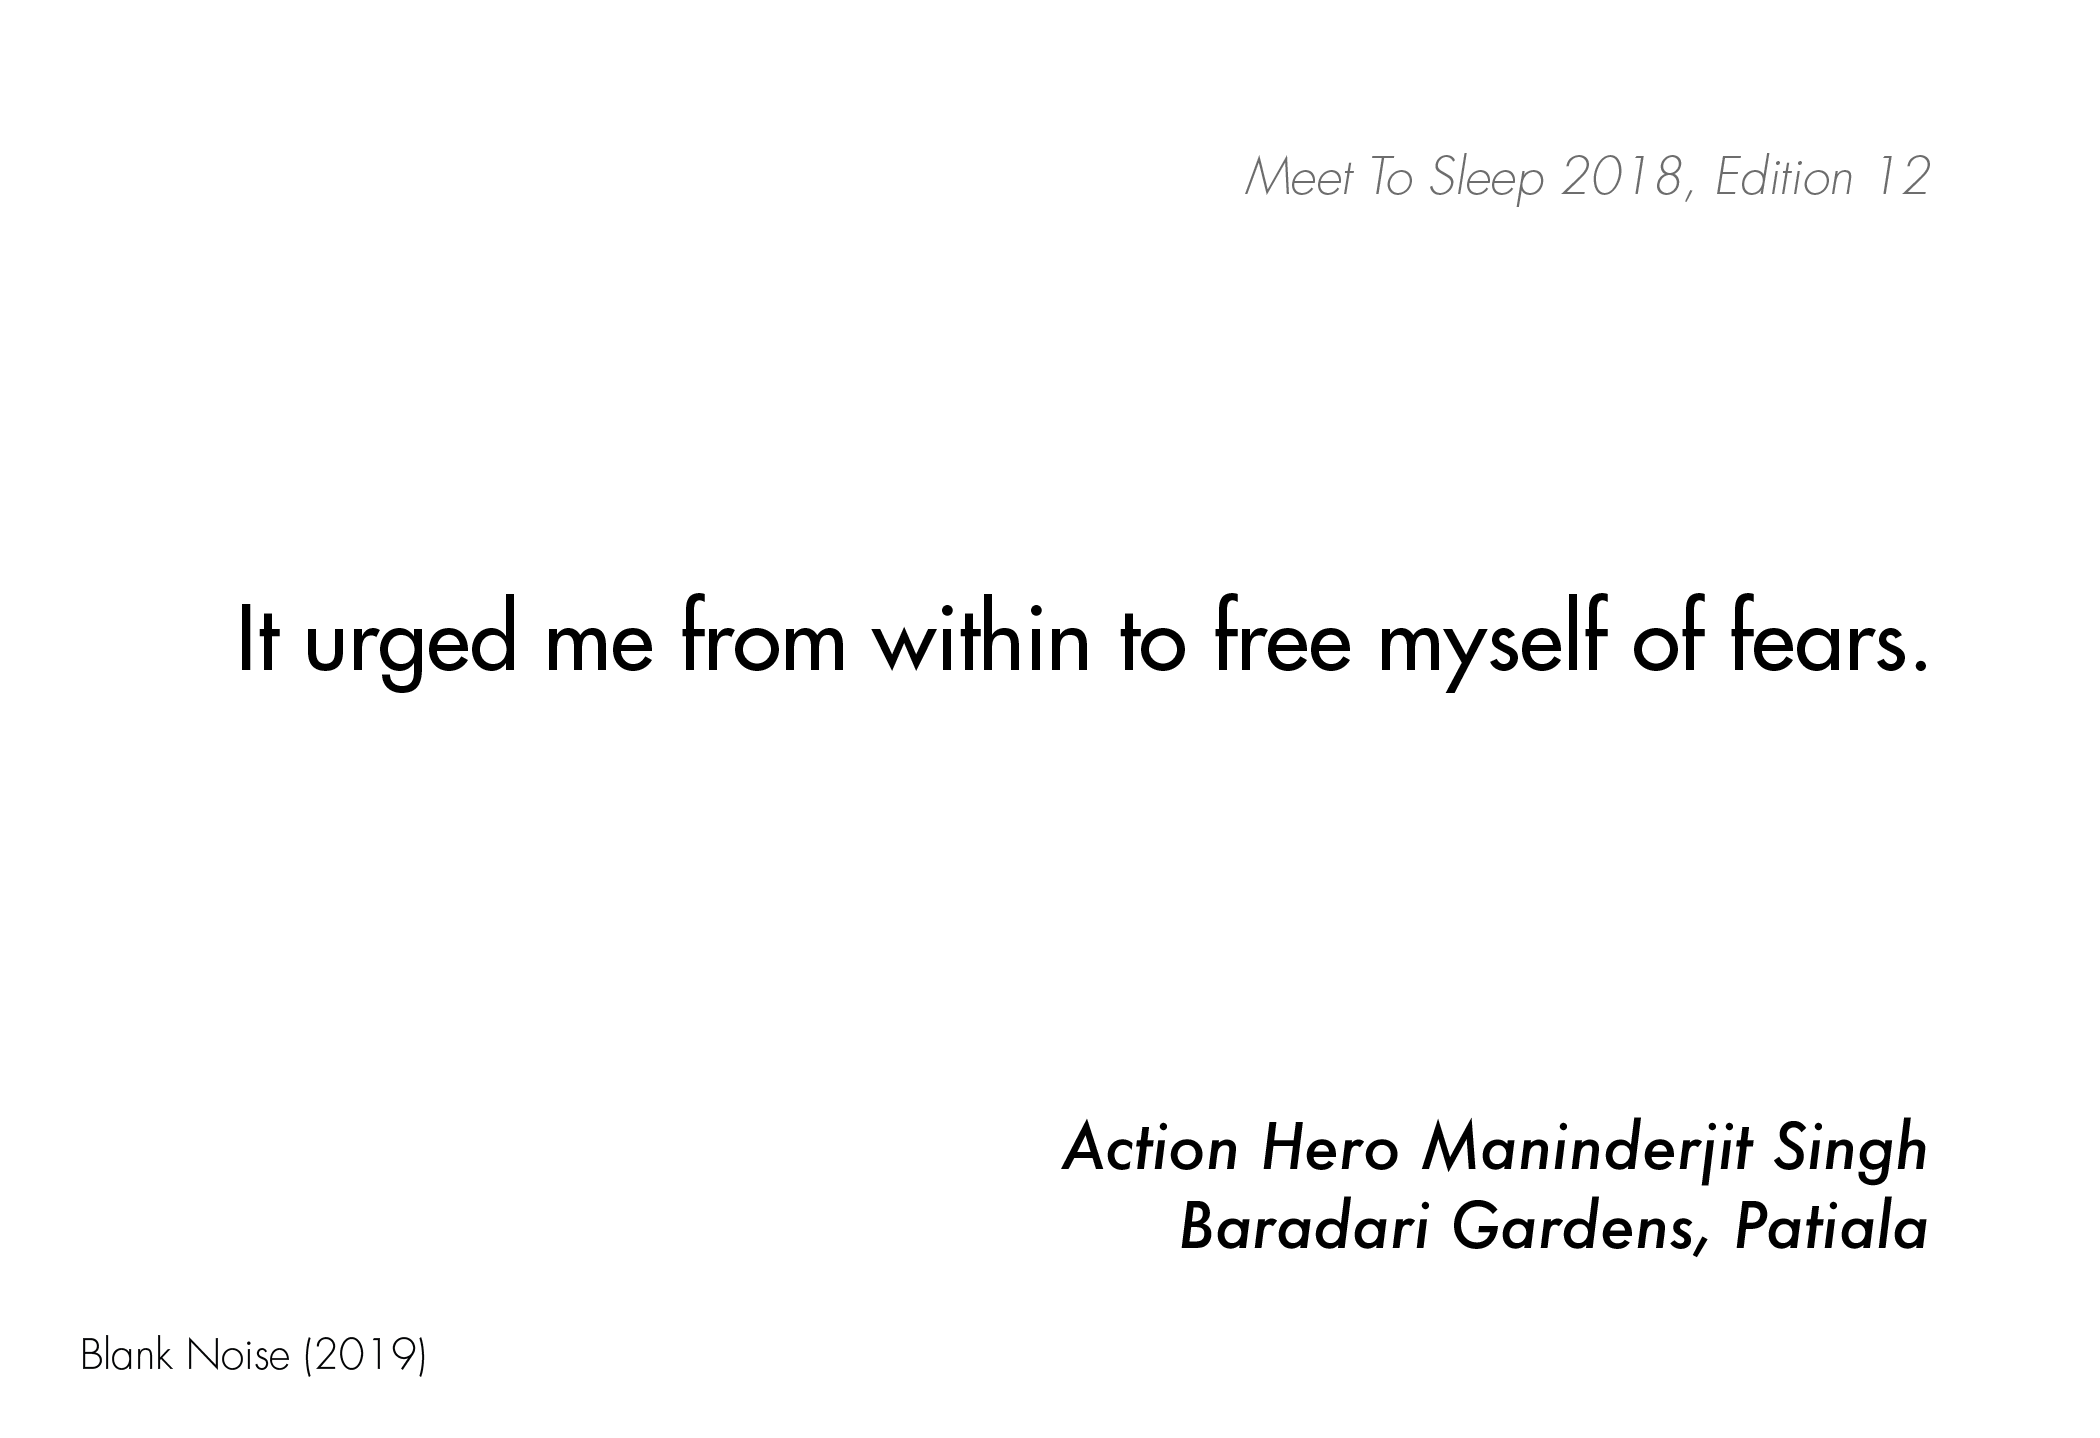 MTS 2018 Quotes -19.png